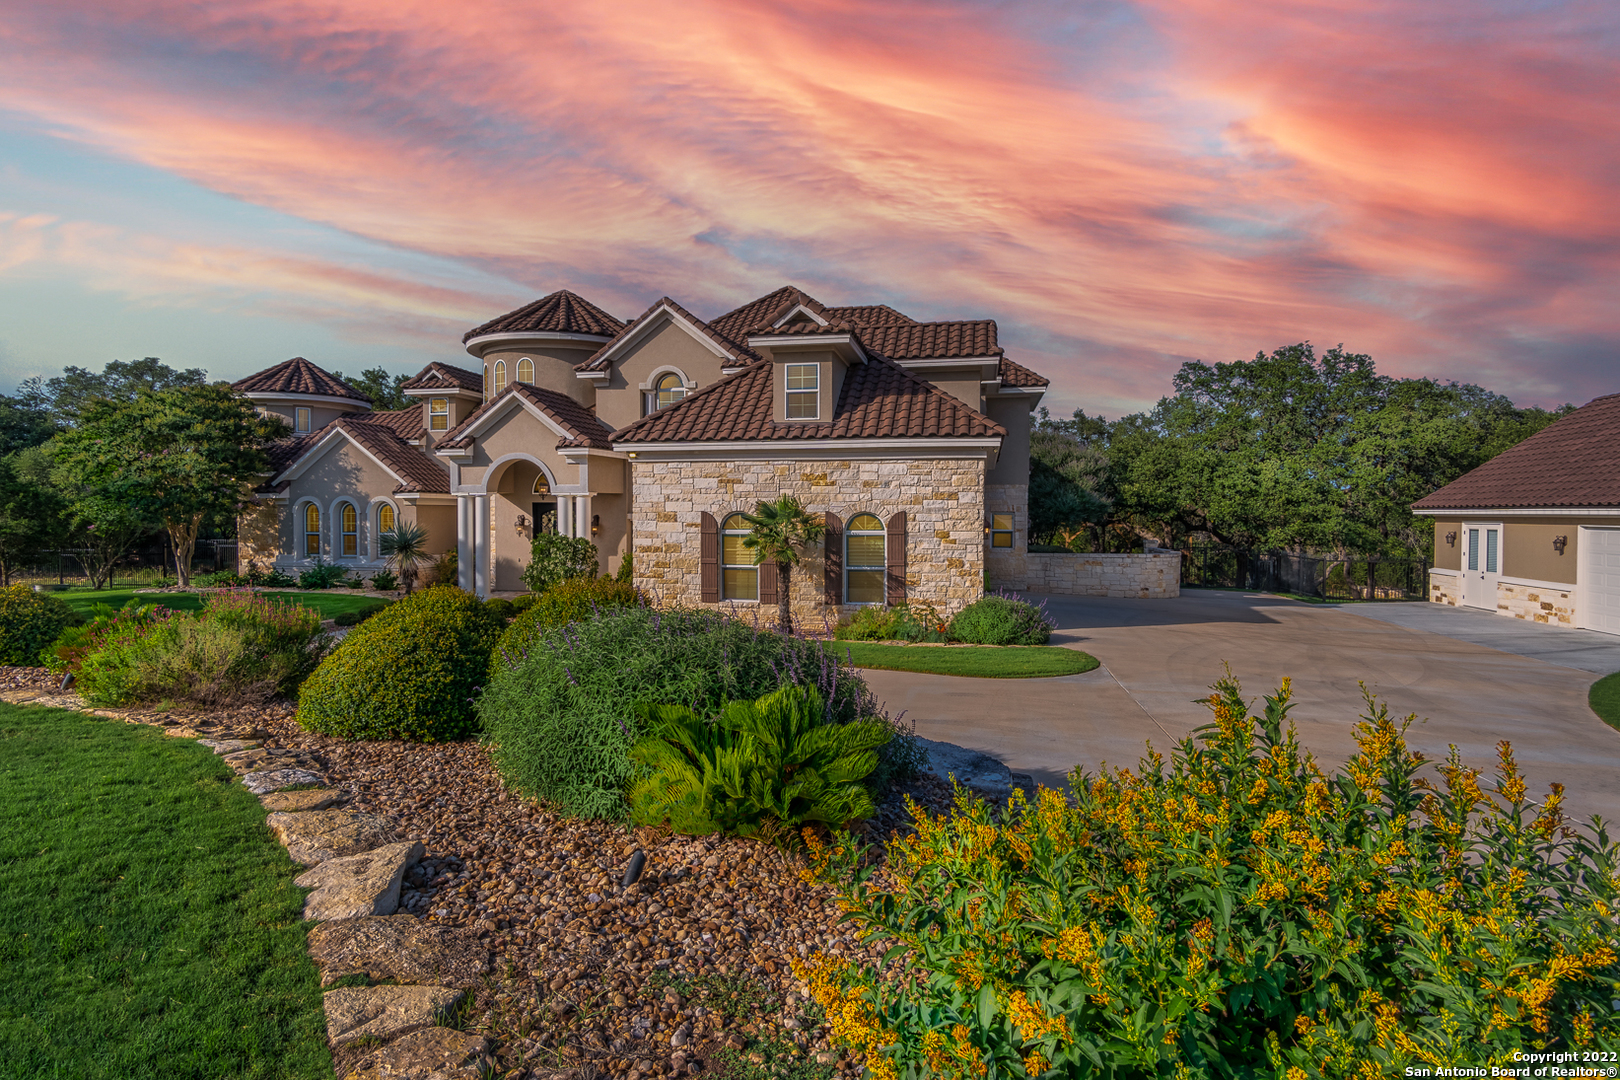 **OPEN HOUSES:  Friday, June 17, 4-7 pm and Saturday, June 18, 11 am - 2 pm**. A stunning one-of-a-kind home located in one of the most highly sought after luxury neighborhoods in the Texas Hill Country. This 6,354 square feet of pure perfection sits on over 3 fenced acres & boasts of 5 spacious bedrooms, 6 bathrooms, media room with 4K technology, TWO wi-fi enabled heated swimming pools, a diving board, a waterslide, water features, grotto, 320 foot long zipline, treehouse, outdoor kitchen, three car garage and an additional two car garage with attached gym and so much more!  Surrounded by majestic oaks, the property also backs to Hill Country views with no rear neighbors - privacy abounds!  The main house is a 5,204 square foot open floorplan and is an entertainer's dream!  Walk through the front doors into a grand entryway with a sweeping staircase that opens to a large family room with a 25 foot tall limestone wood burning fireplace.   Gorgeous hardwood & tile floors throughout as well as luxurious carpet in the bedrooms.  The massive master bedroom, overlooking the resort style backyard, has its own coffee/wine bar, a 265 square foot closet, walk-in vault, huge shower and tub for two!  The kitchen is filled with wall-to-wall custom cabinets, granite counters, 6 burner gas cooktop and two islands!  A media room sits just down the hall and has 7 comfortable reclining chairs perfect for curling up to watch your favorite movies on a 4K screen!  Upstairs are 4 additional bedrooms, all with access to their own bathrooms & large walk-in closets.  The secondary building has a two car garage and an attached 500 square foot air-conditioned gym with commercial grade PreCor exercise equipment (that may be included if buyer is interested) and a 650 square foot air-conditioned bonus room upstairs!  Located in Vintage Oaks, you'll have access to world class amenities:  lazy river, 4 swimming pools, park, playground, 6 miles of trails, fitness center and more.  This home & community are the definition of 'resort style living at its finest'!